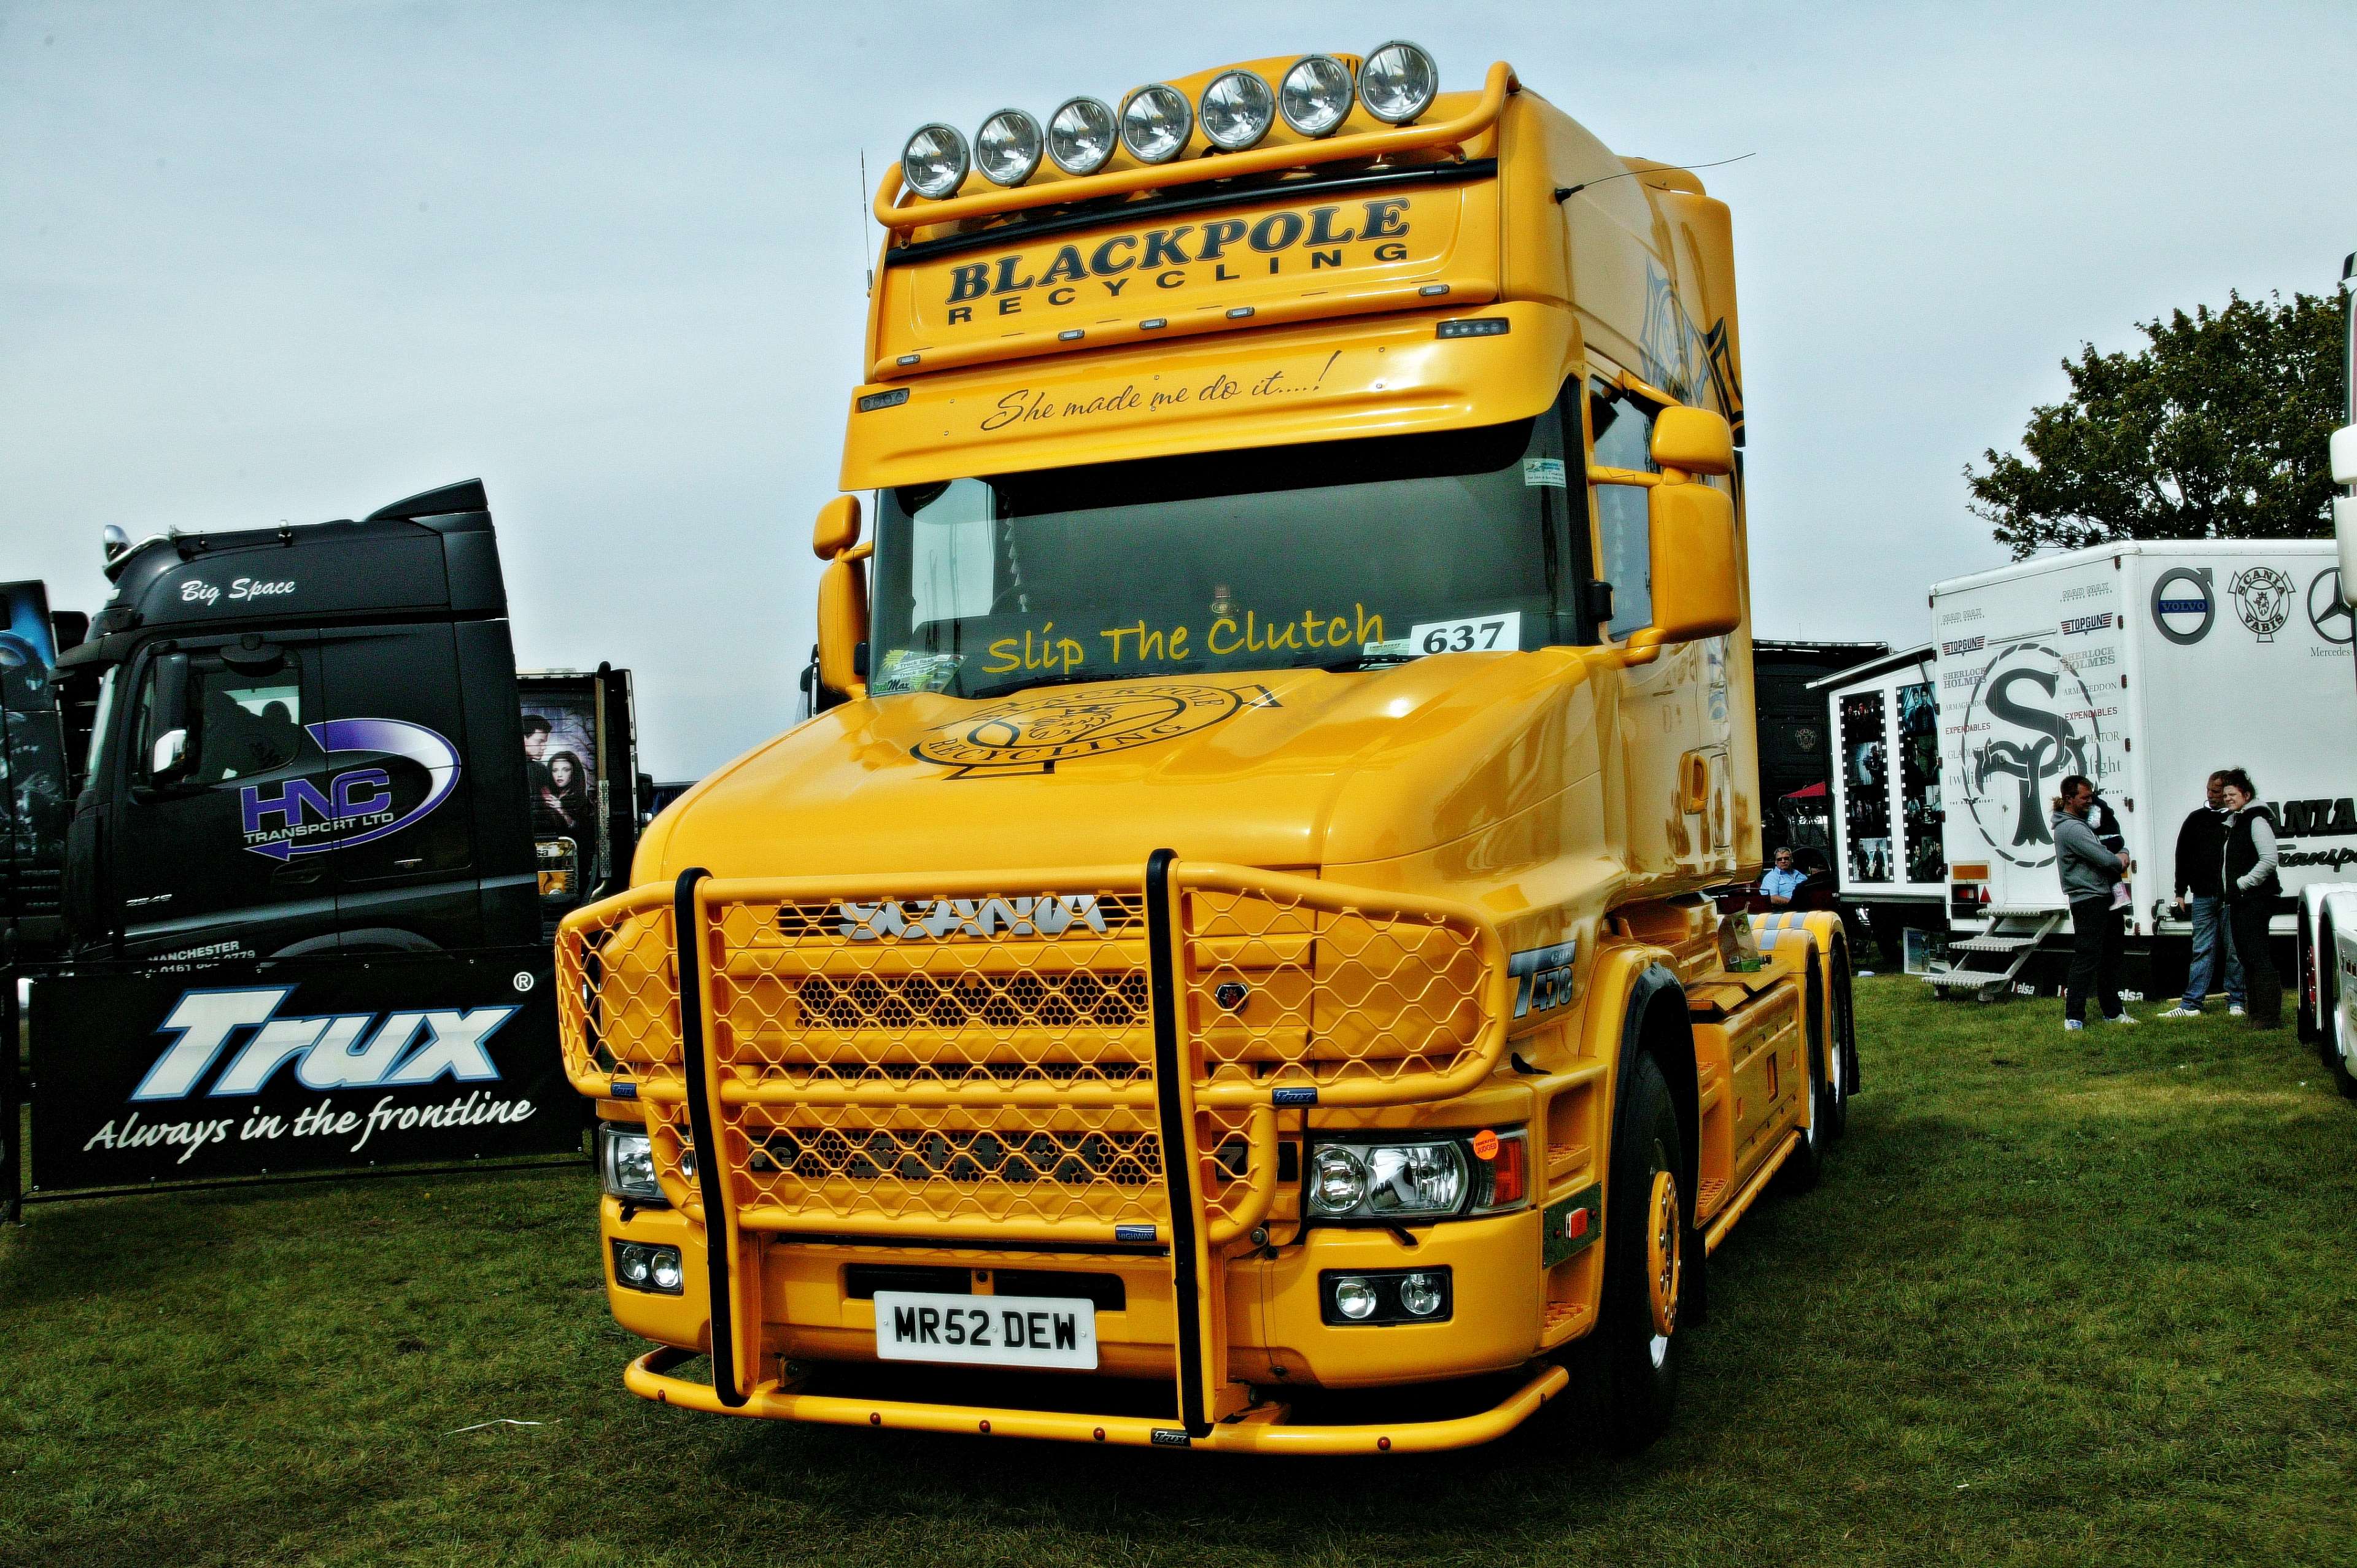 Blackpole, Bonetted, Bullbar, Conventional, Lorry, - Trailer Truck , HD Wallpaper & Backgrounds